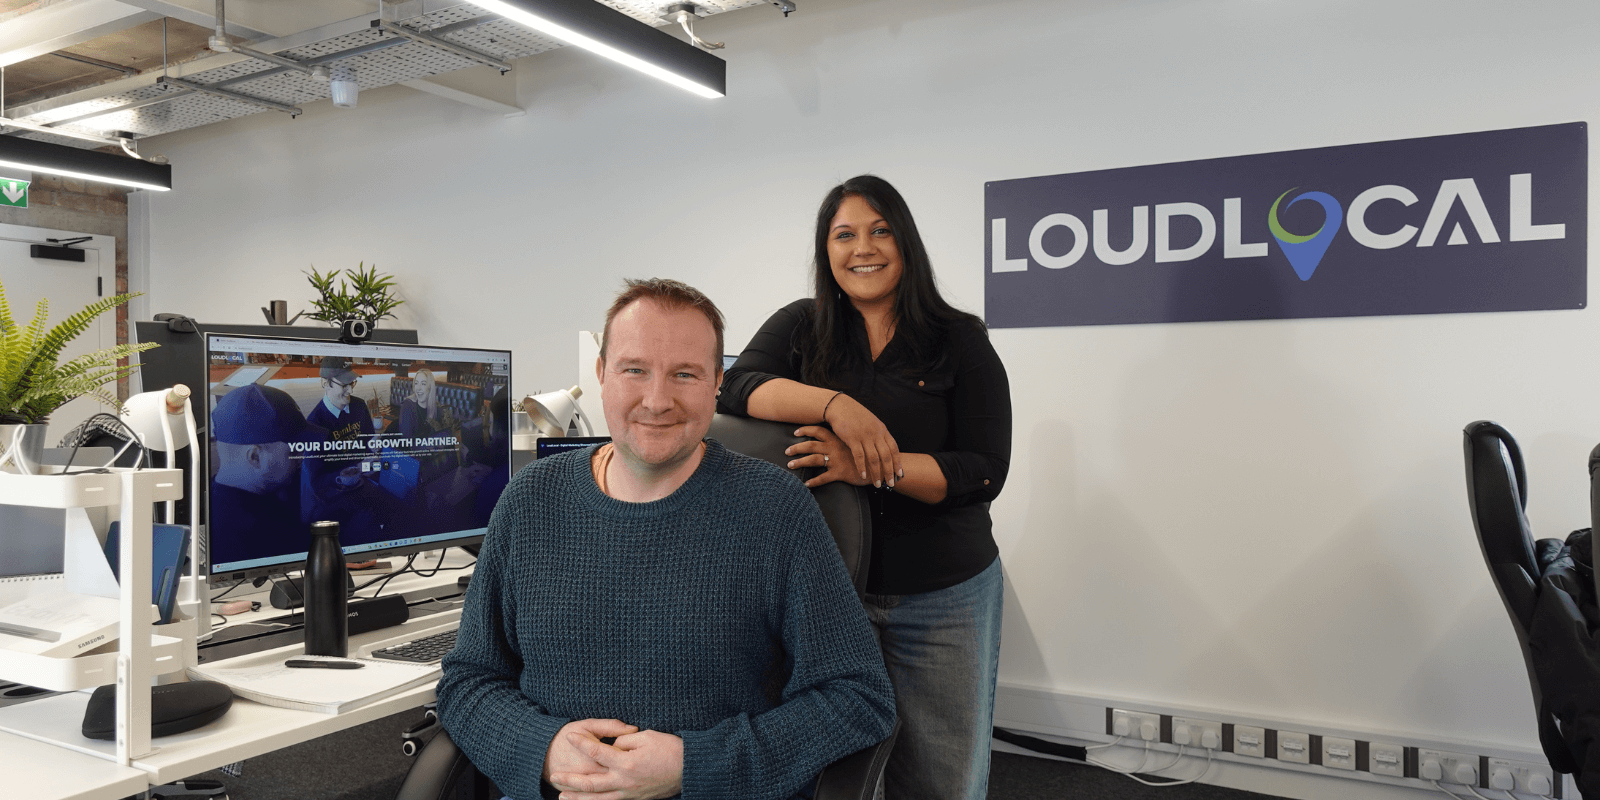 A picture of our 2 founders, Leon Hidderley and Priya Pandit in the new office, with the LoudLocal sign behind and a computer open on the LoudLocal website